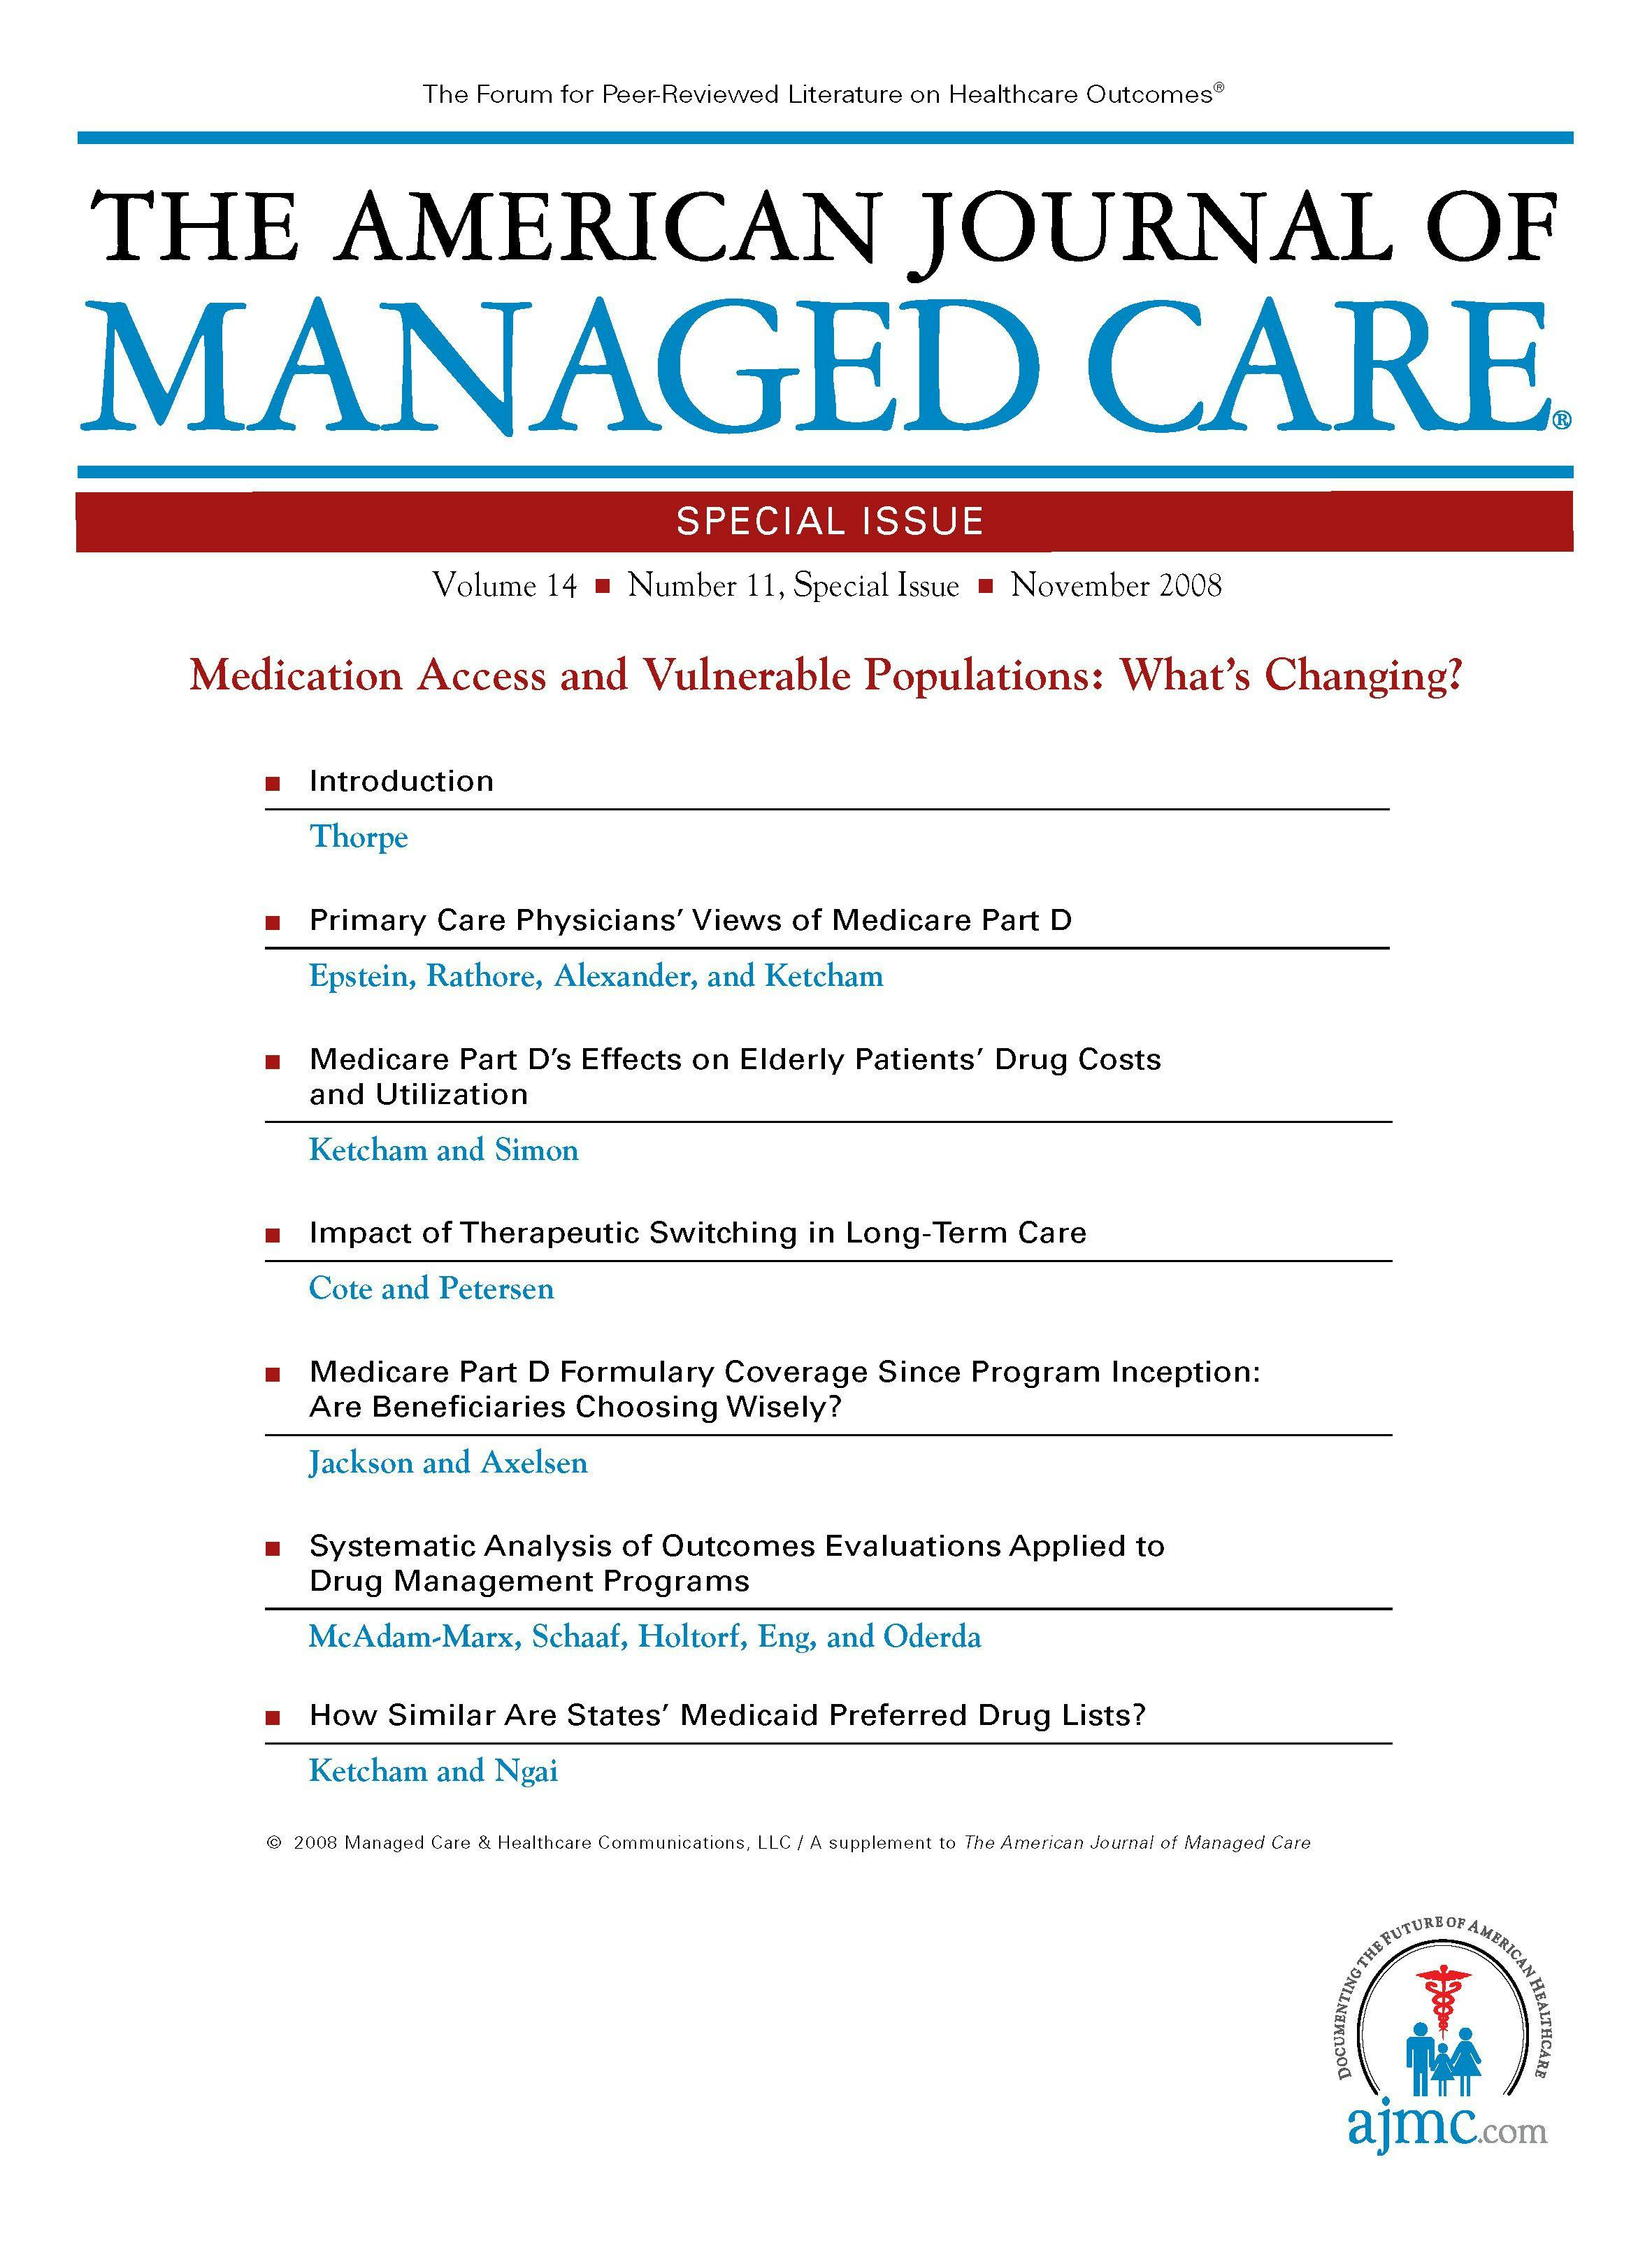 January 2005 - Special Issue